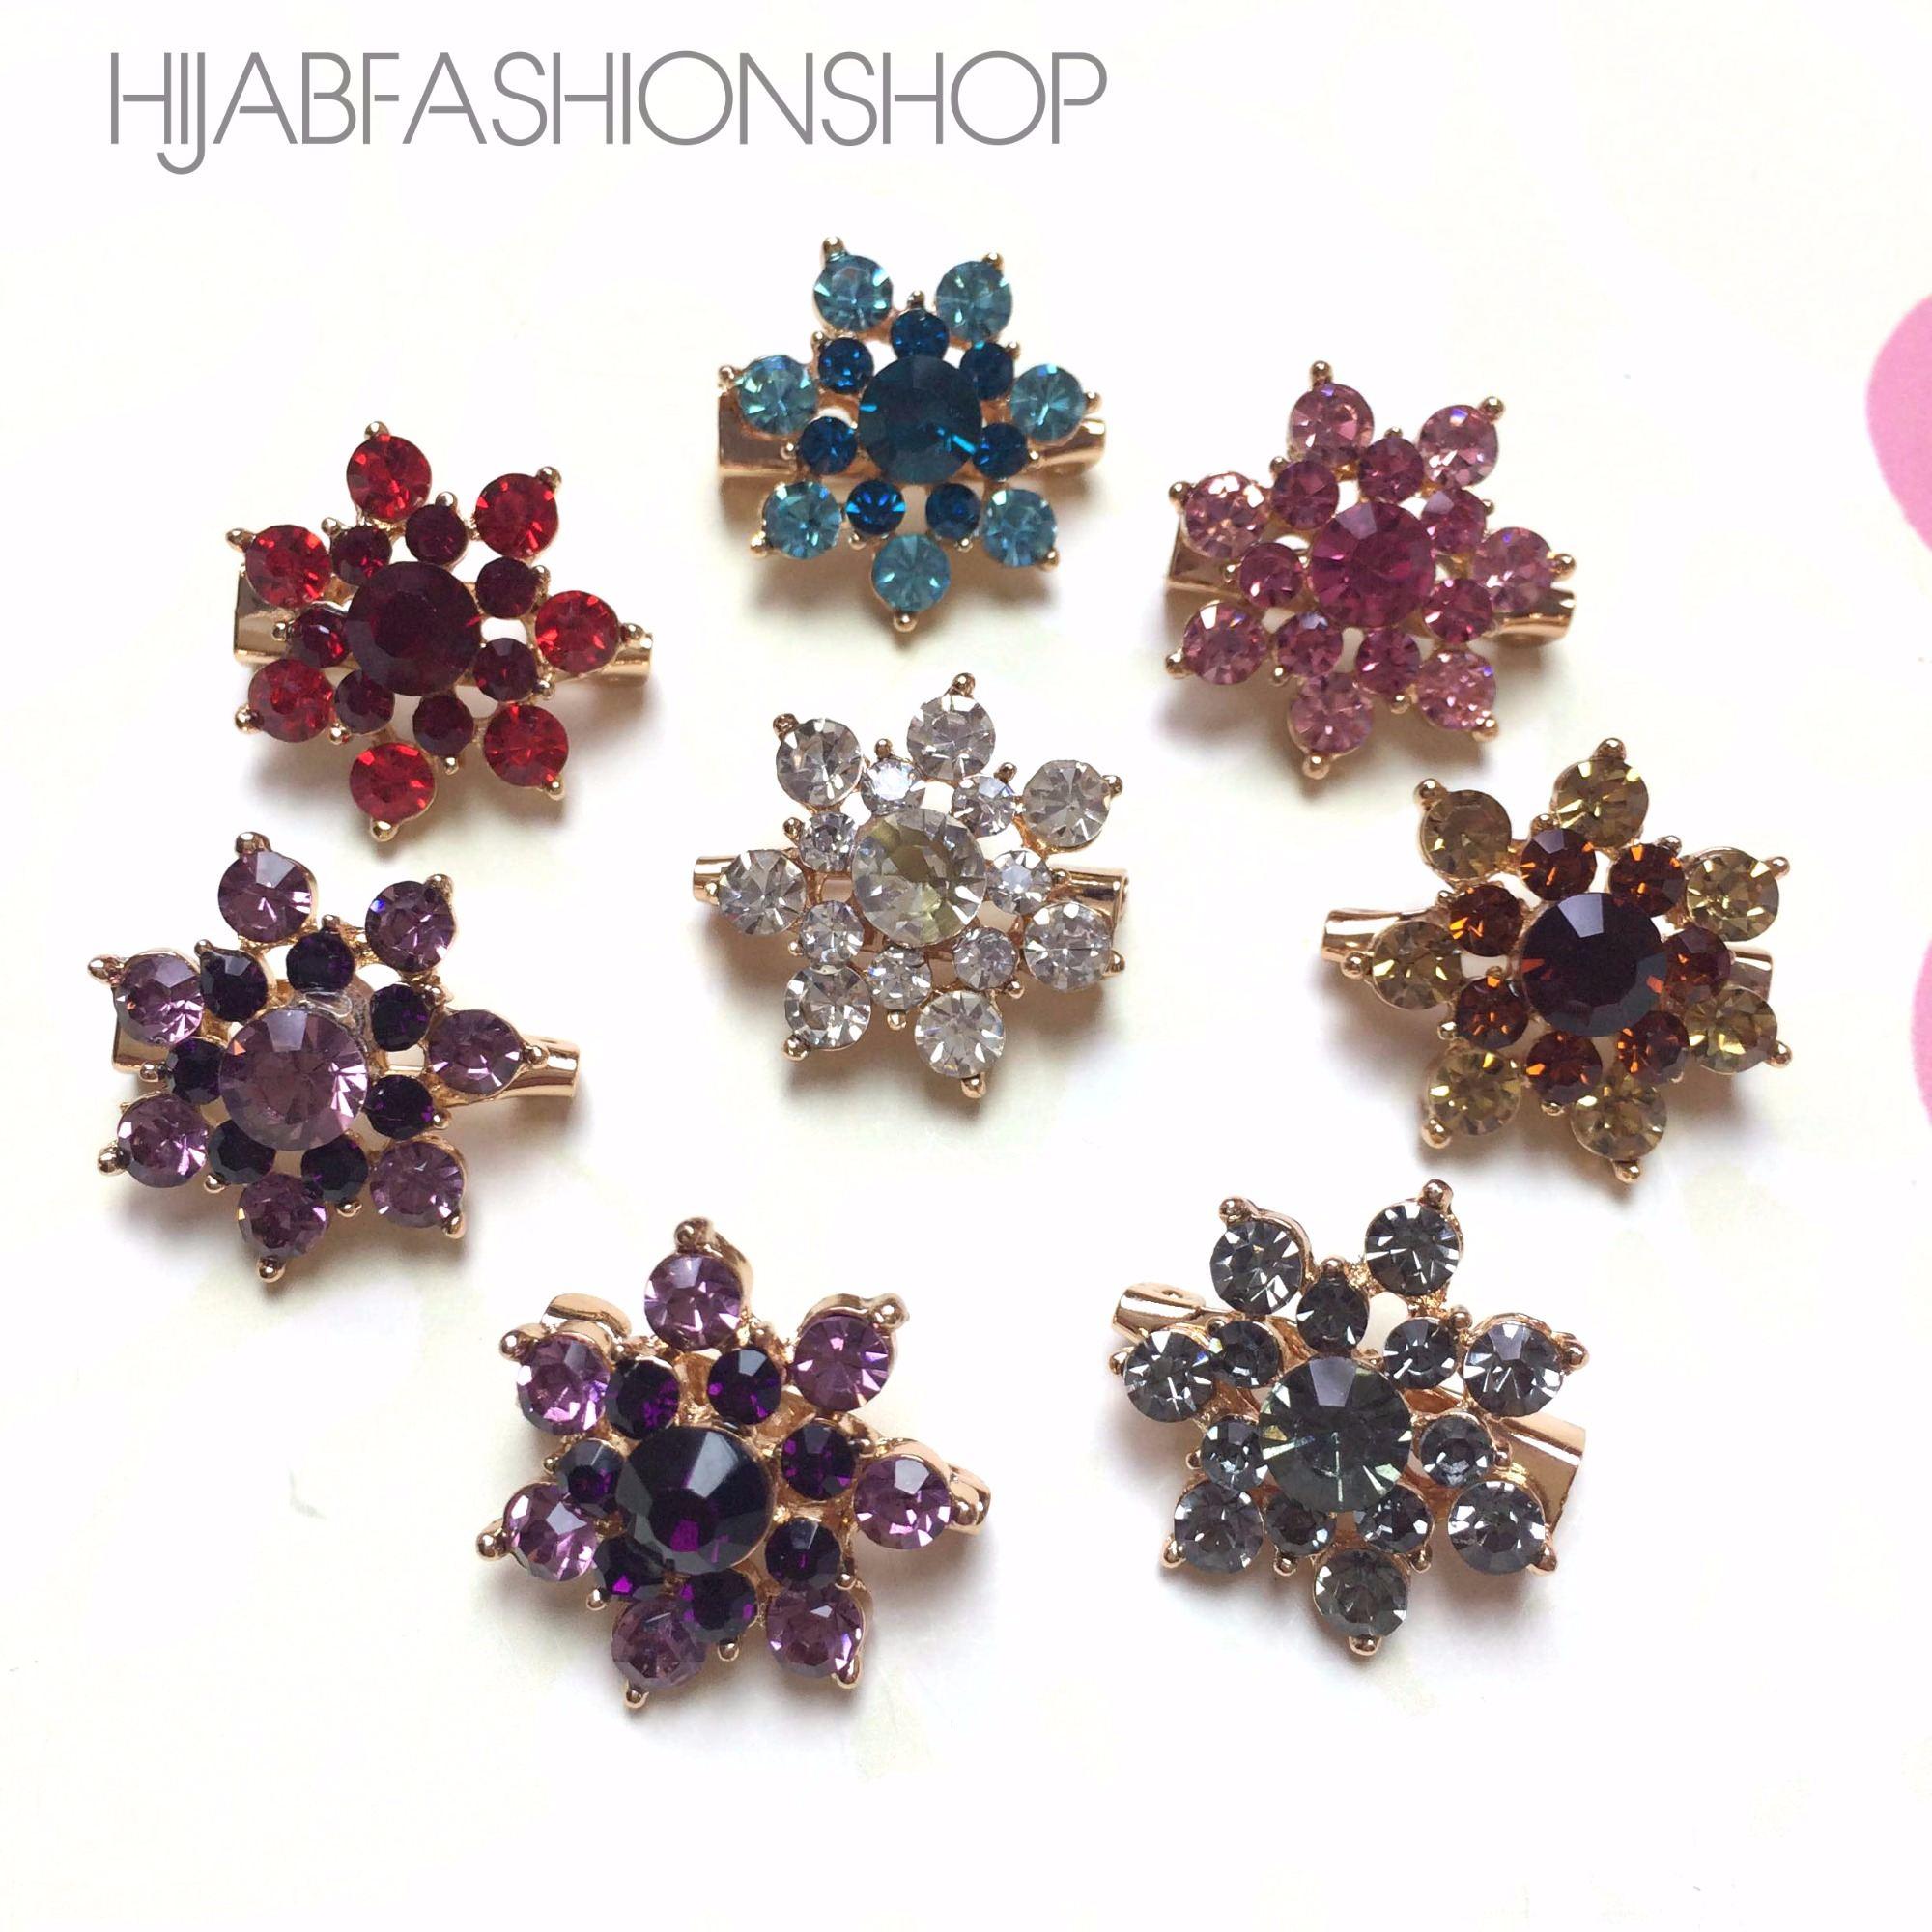 8 crystal mini brooches in variety of colours